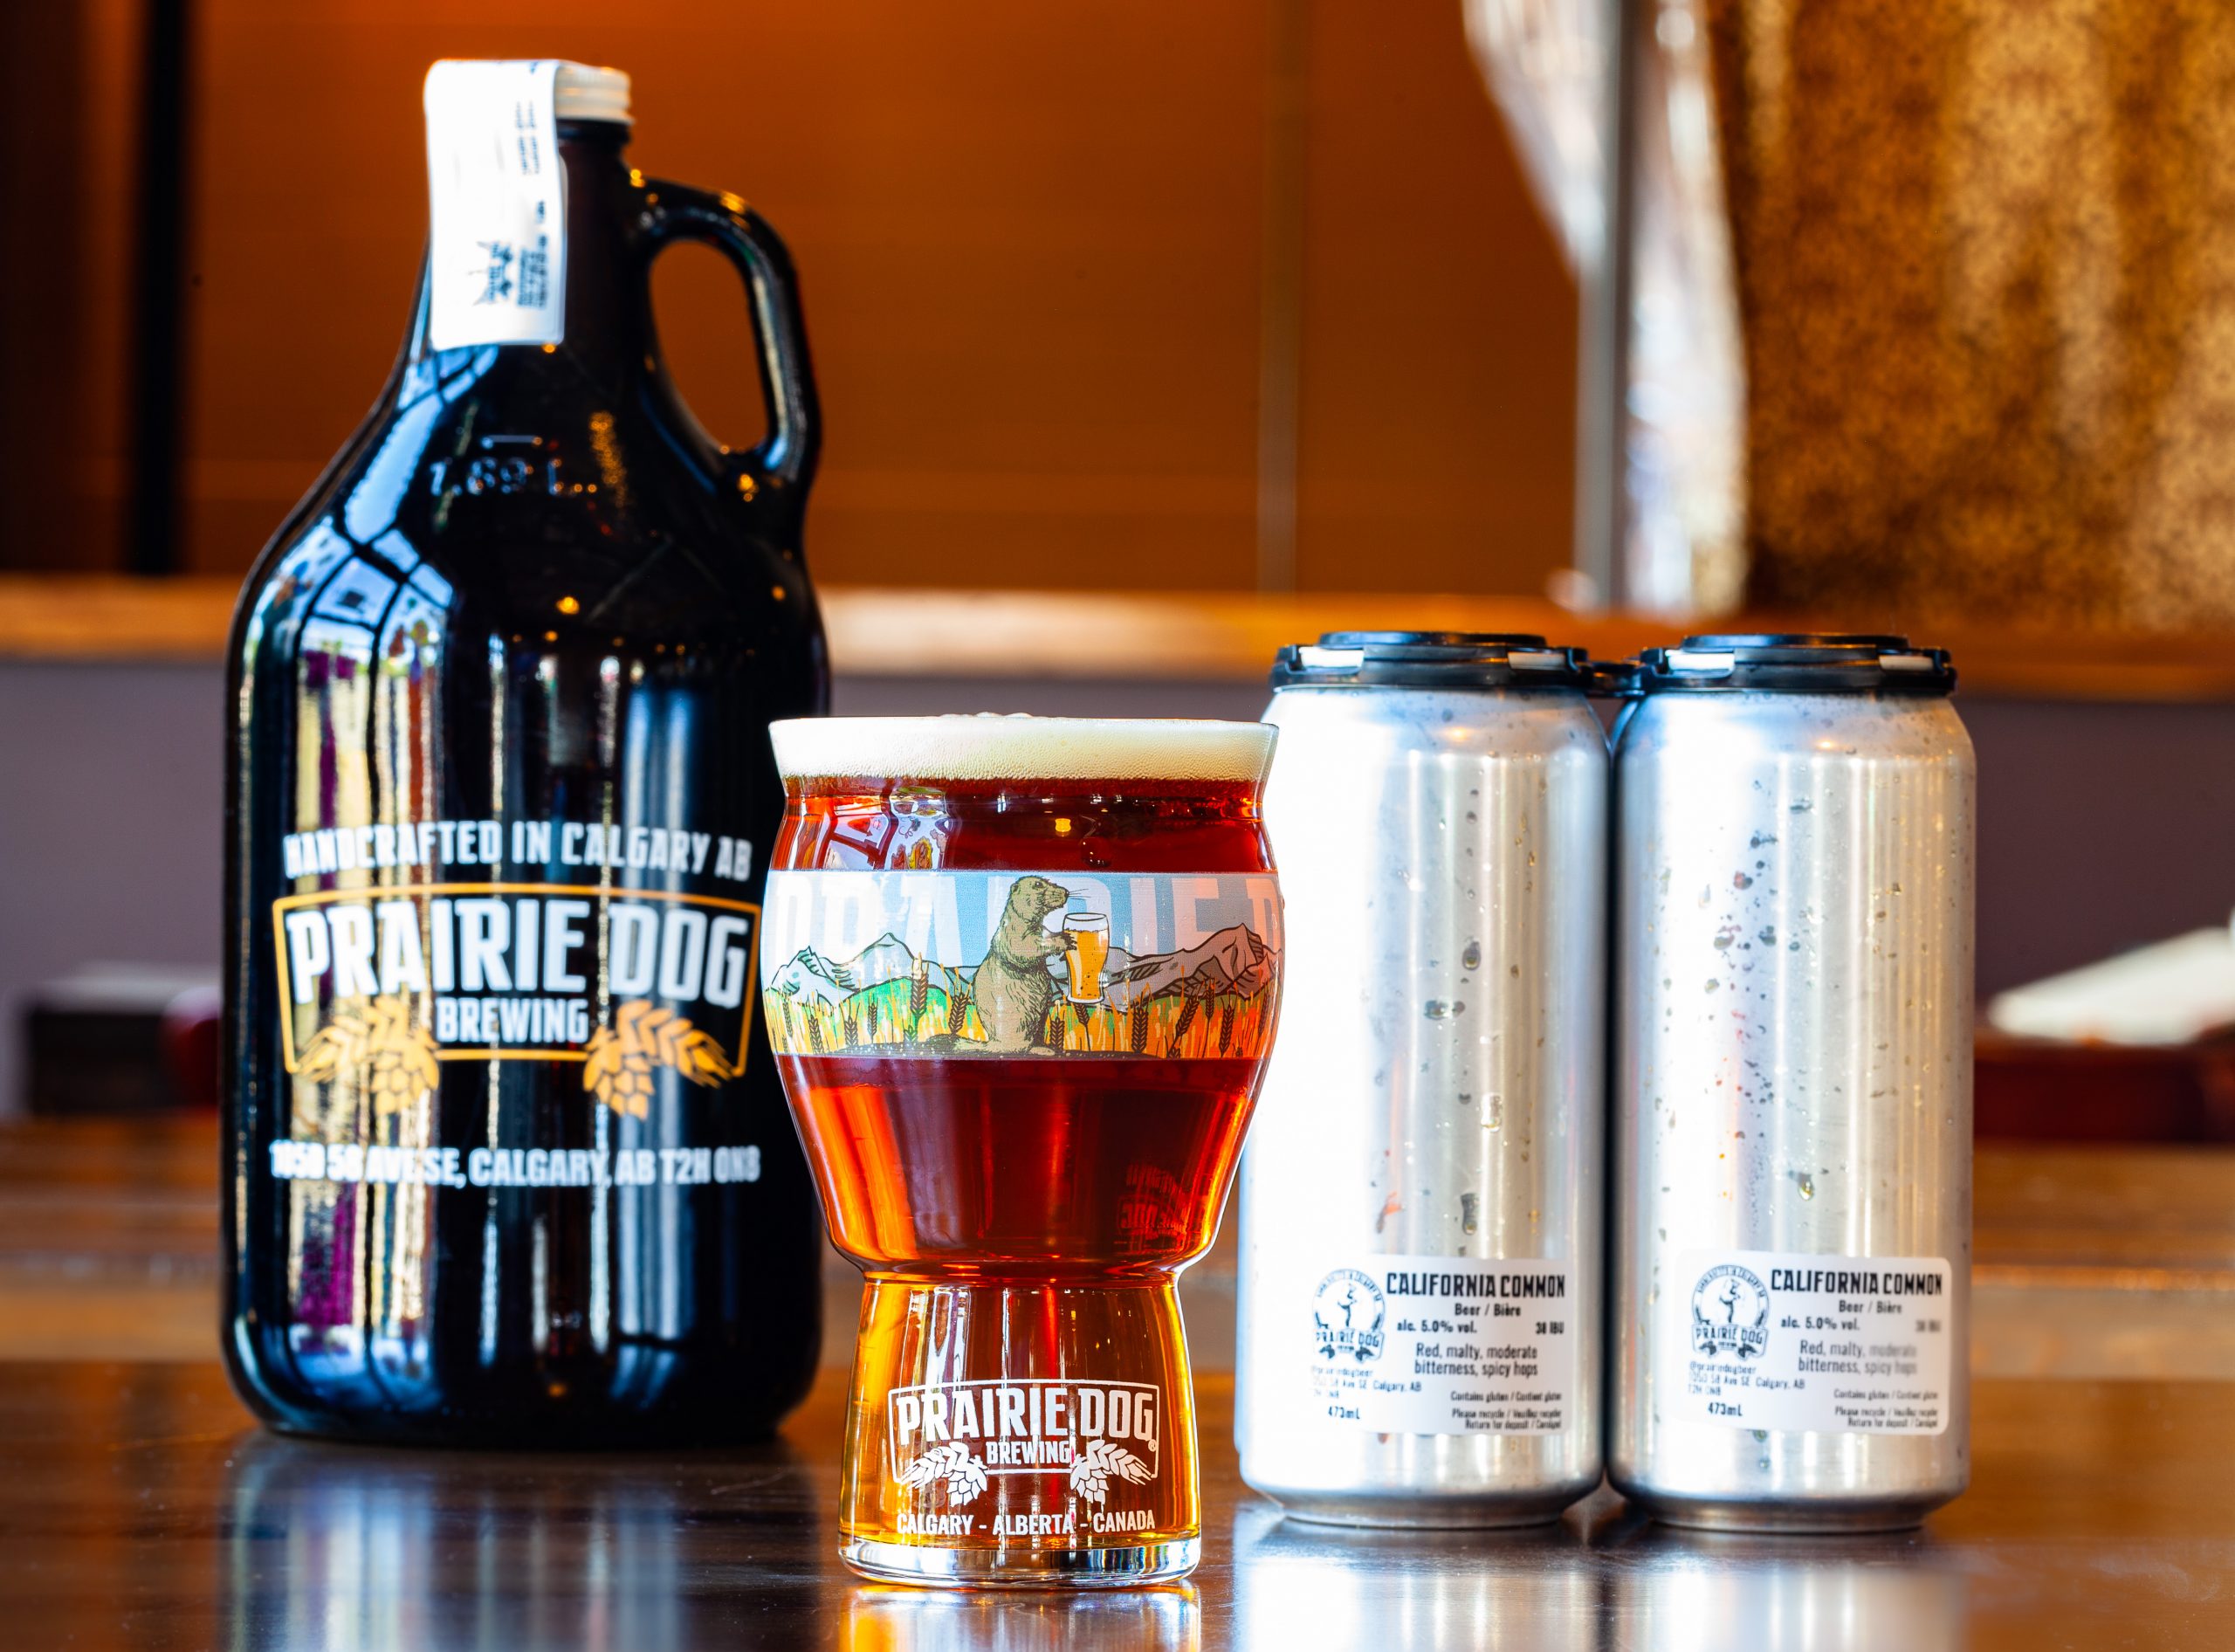 Prairie Dog Brewing's California Common red lager in a 16oz glass, 473mL cans and 64oz growler